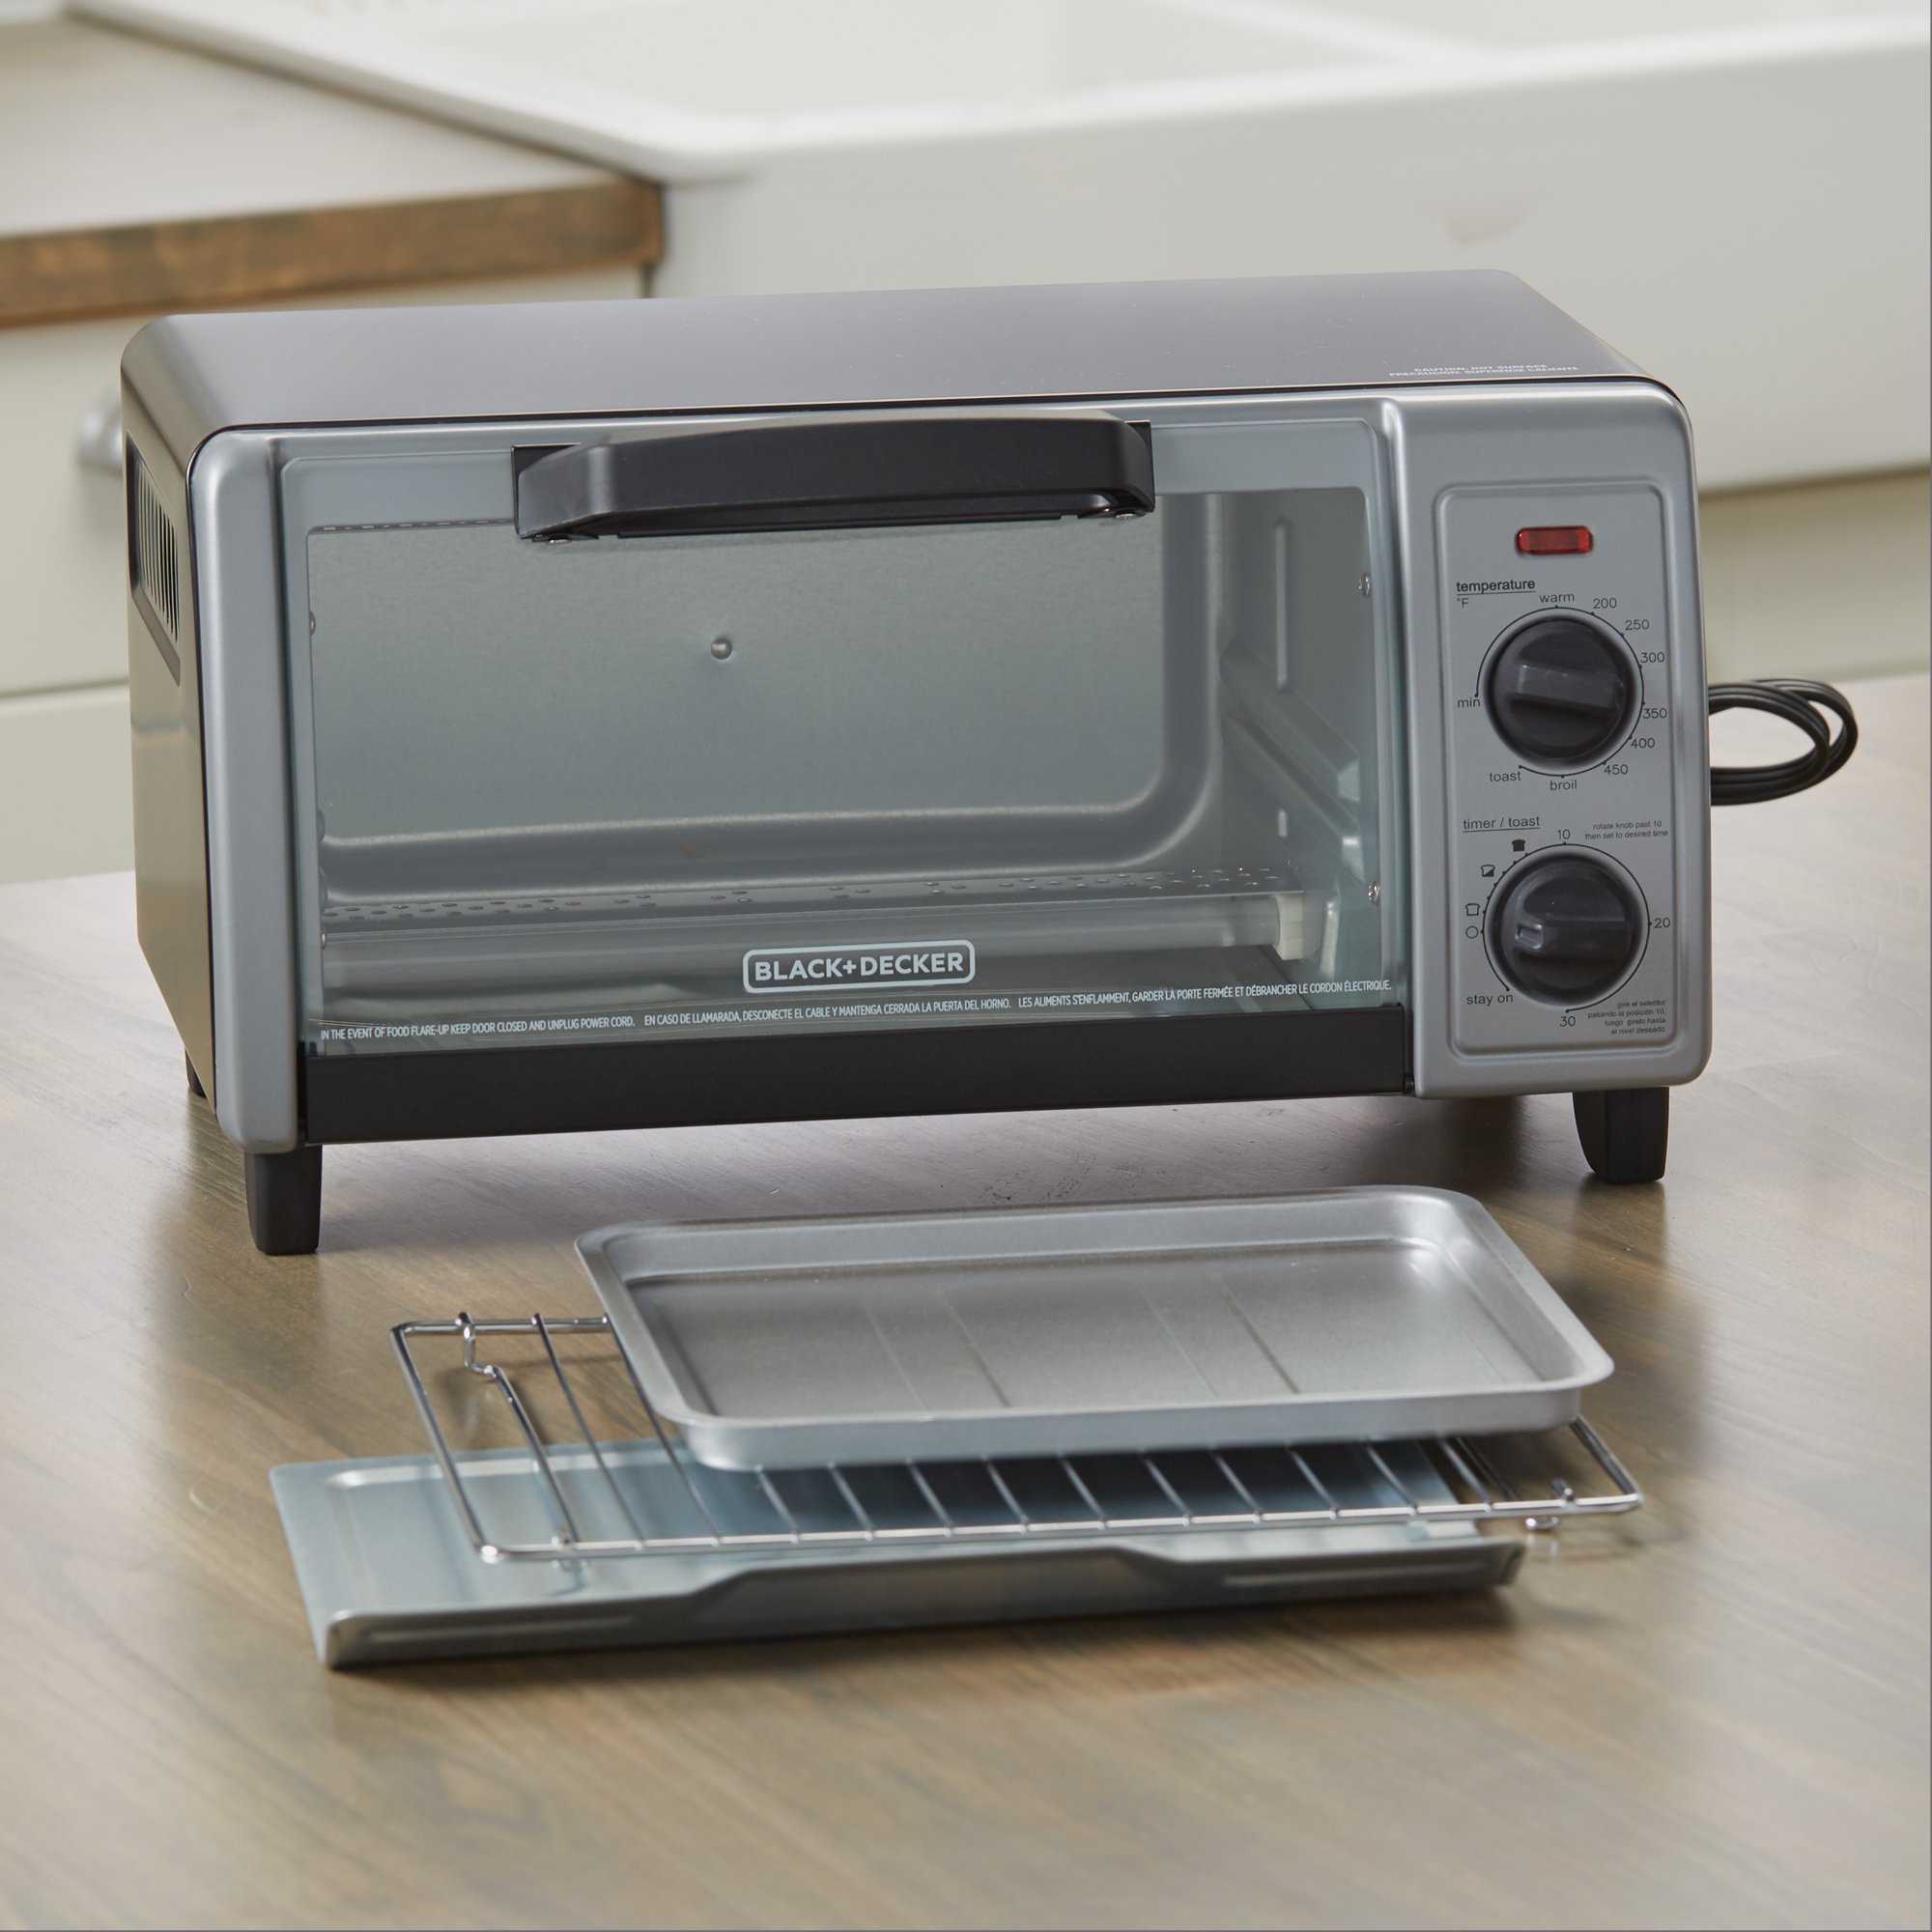 BLACK+DECKER 4-Slice Toaster Oven, Stainless Steel, TO1705SB - image 4 of 8